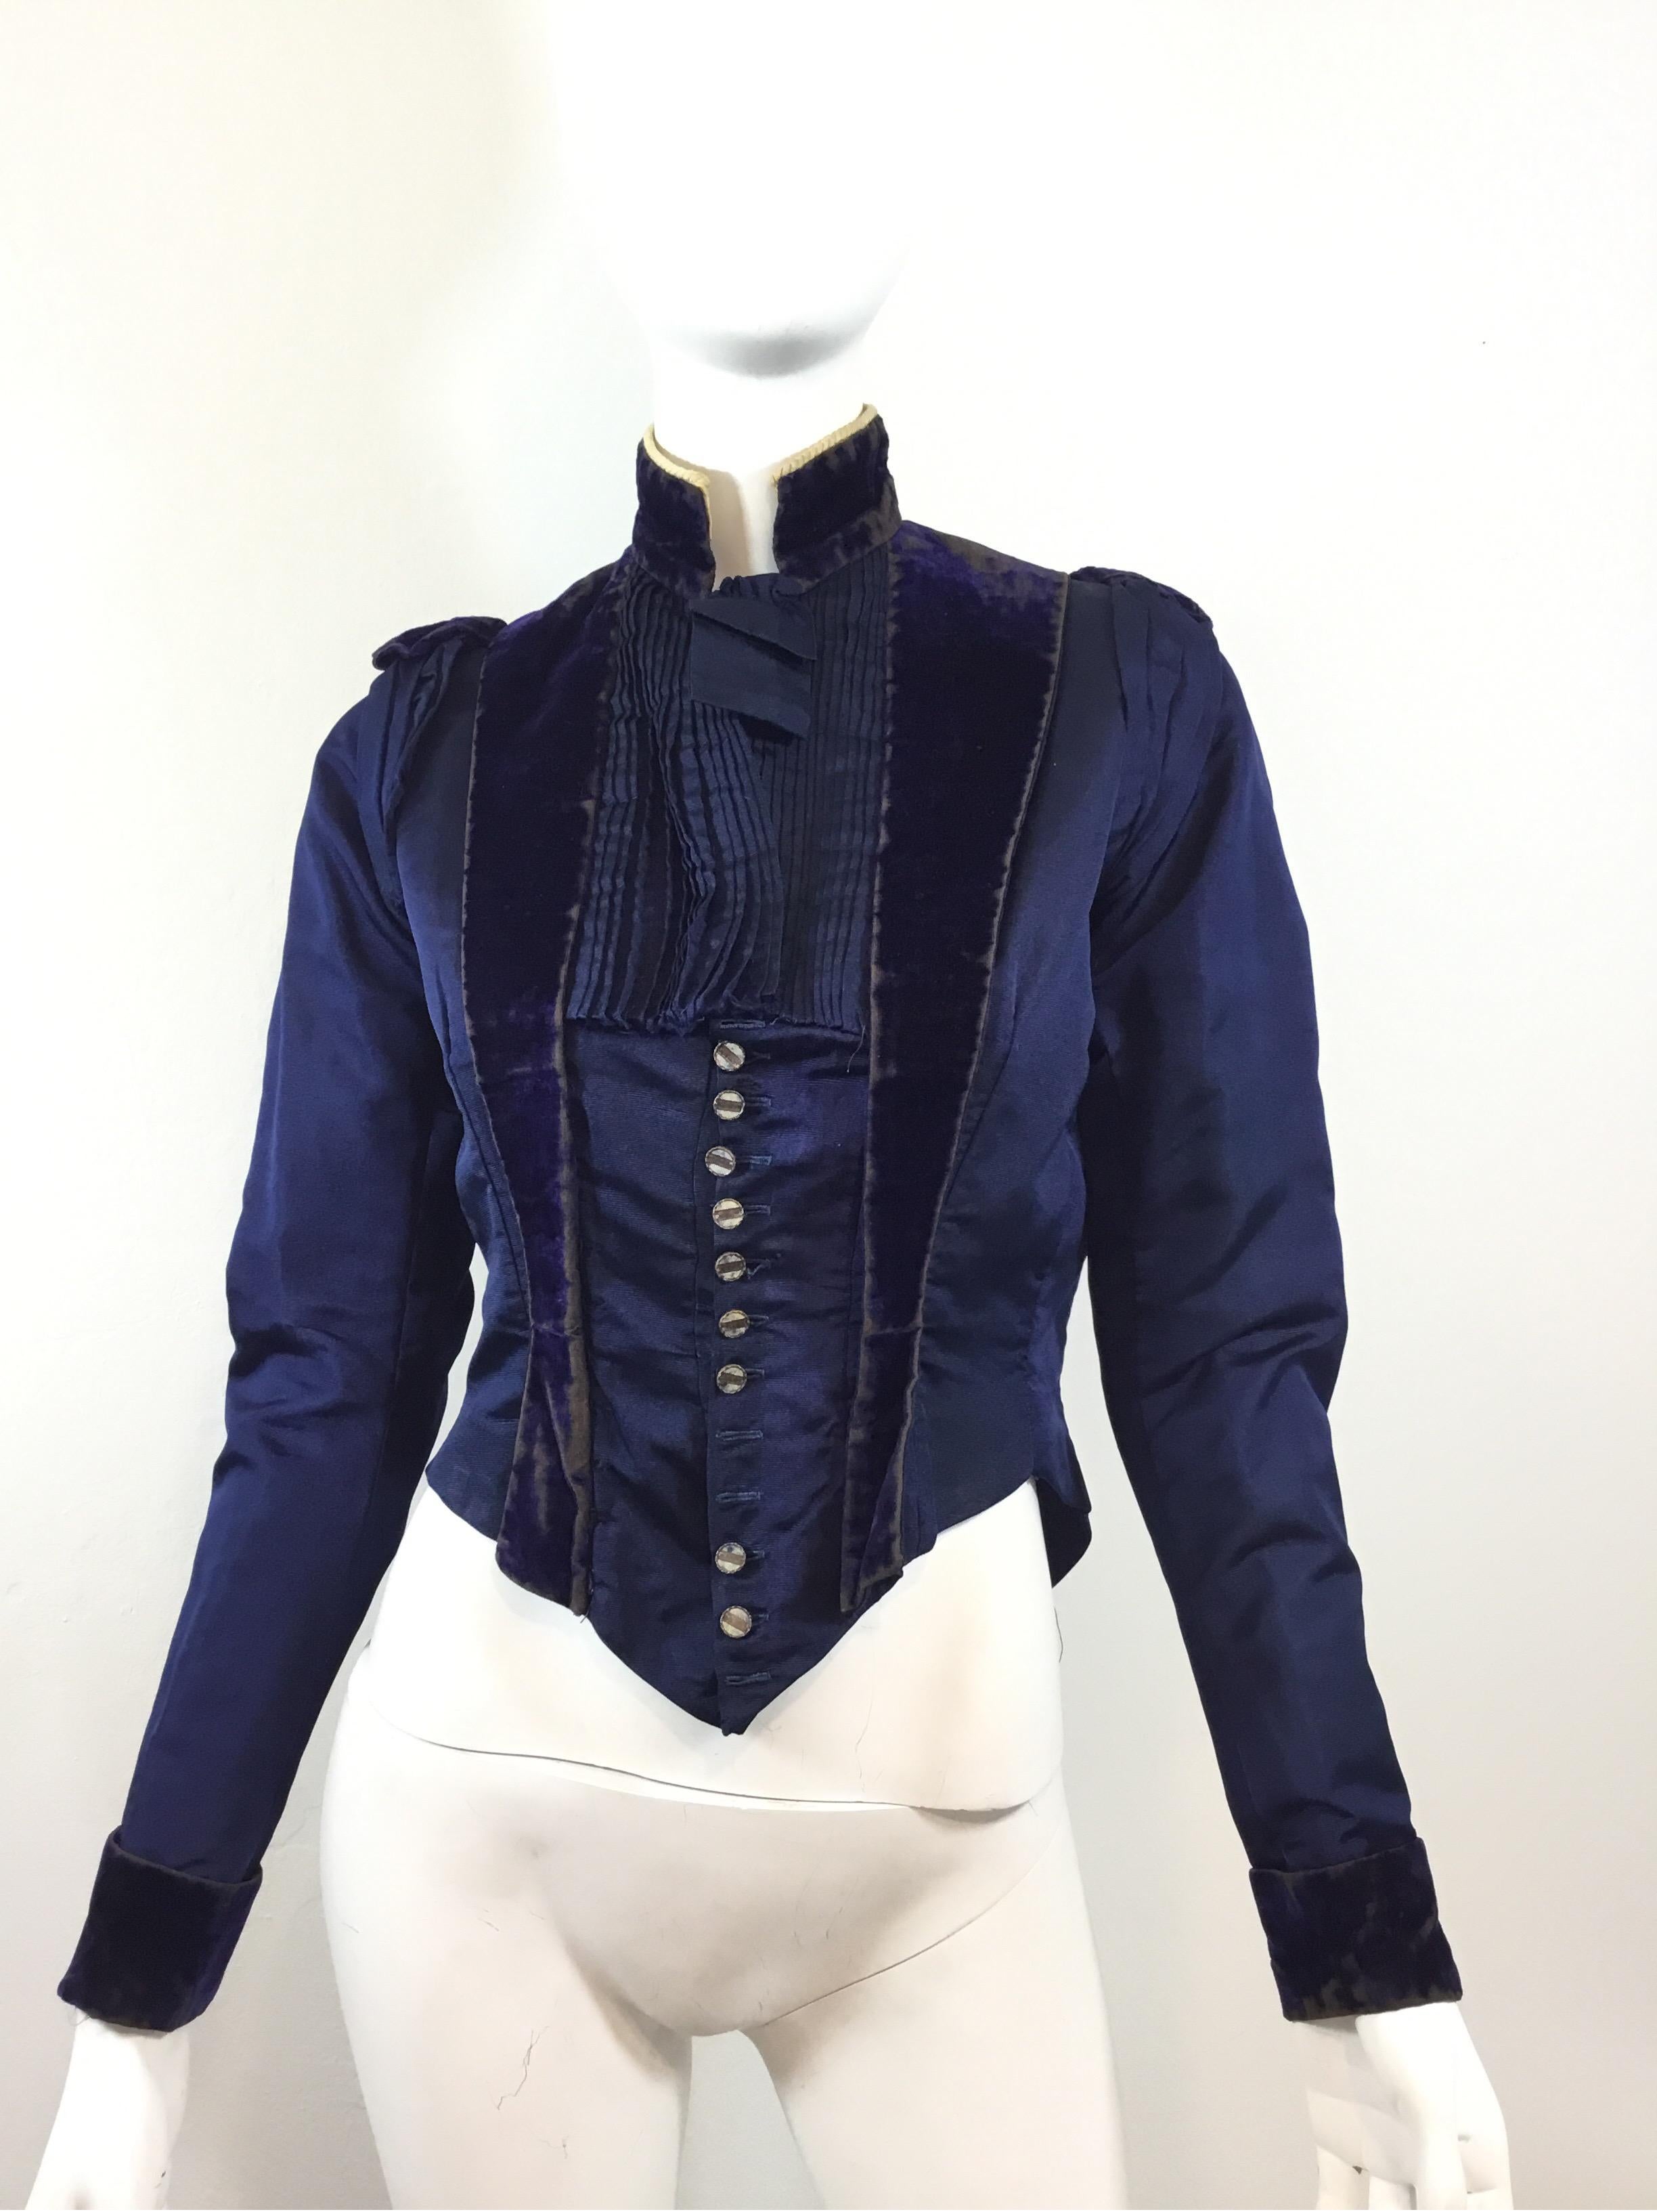 Victorian jacket featured in a navy with velvet panels, front button and hook-and-eye fastenings, a pintucked detail at the opening, and a Cream twisted piping along the collar. Jacket is boned at the bodice and fully lined; Lining shows some normal